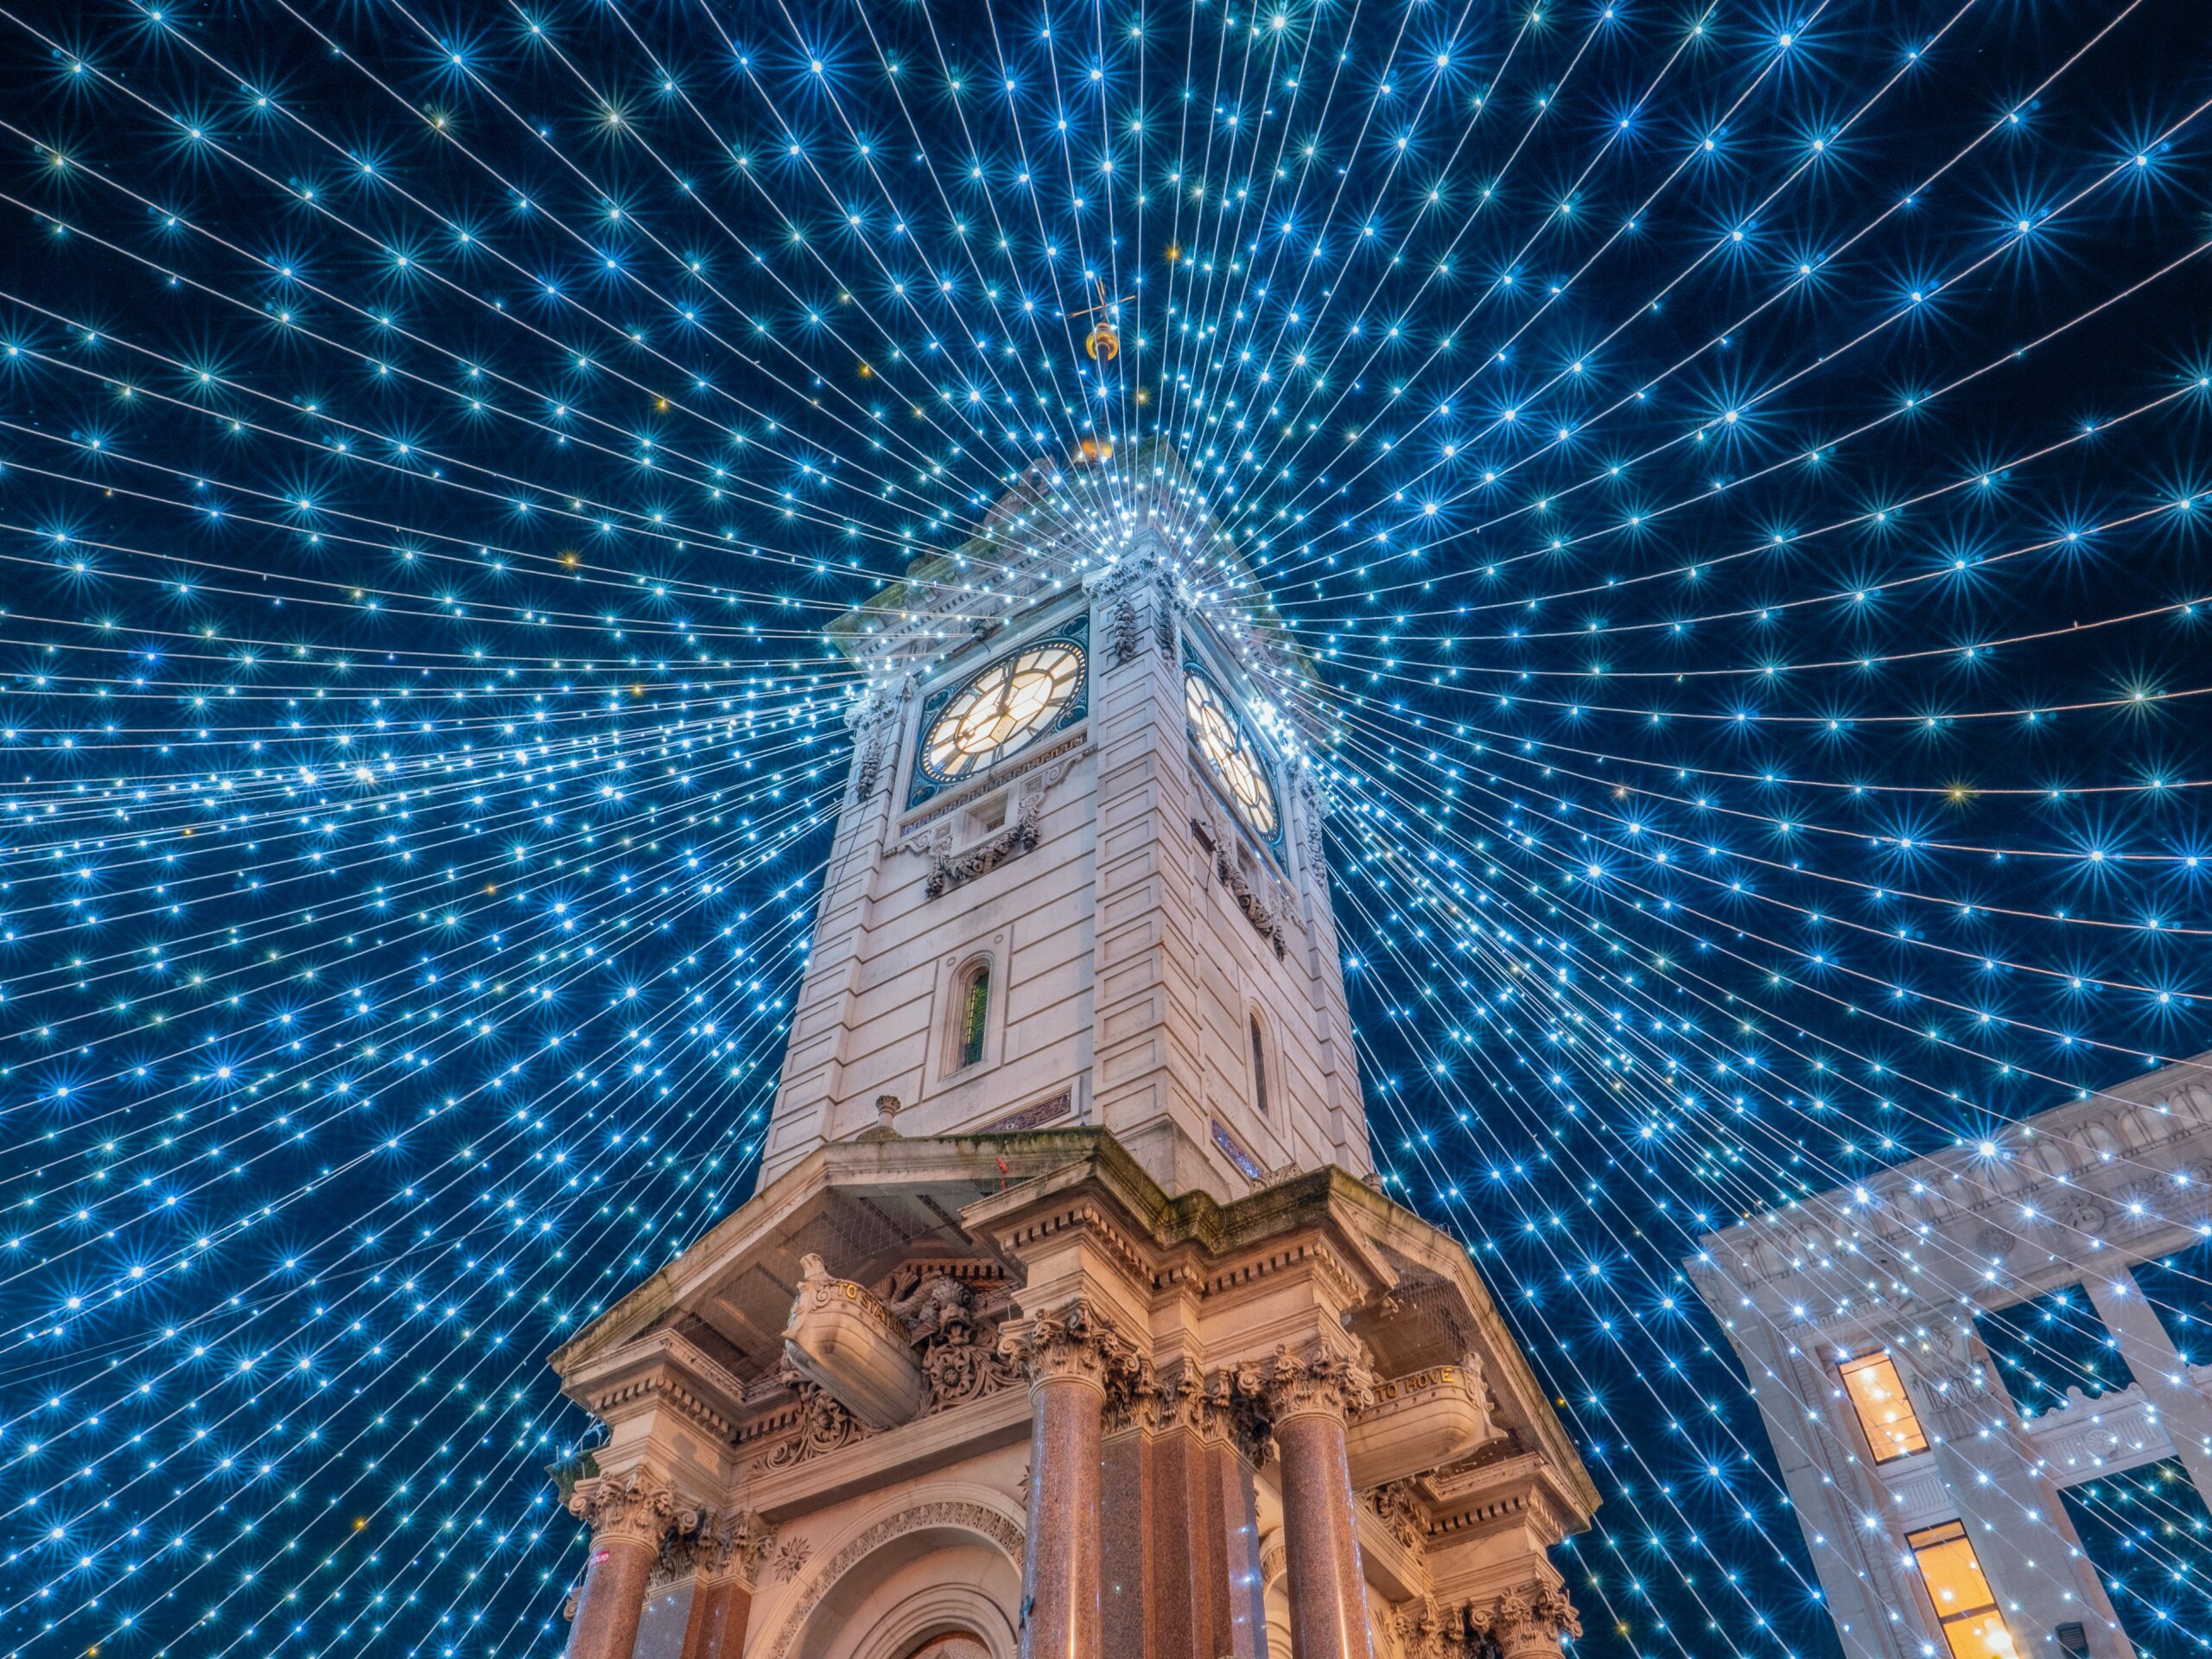 Brighton Clock Tower with lights on